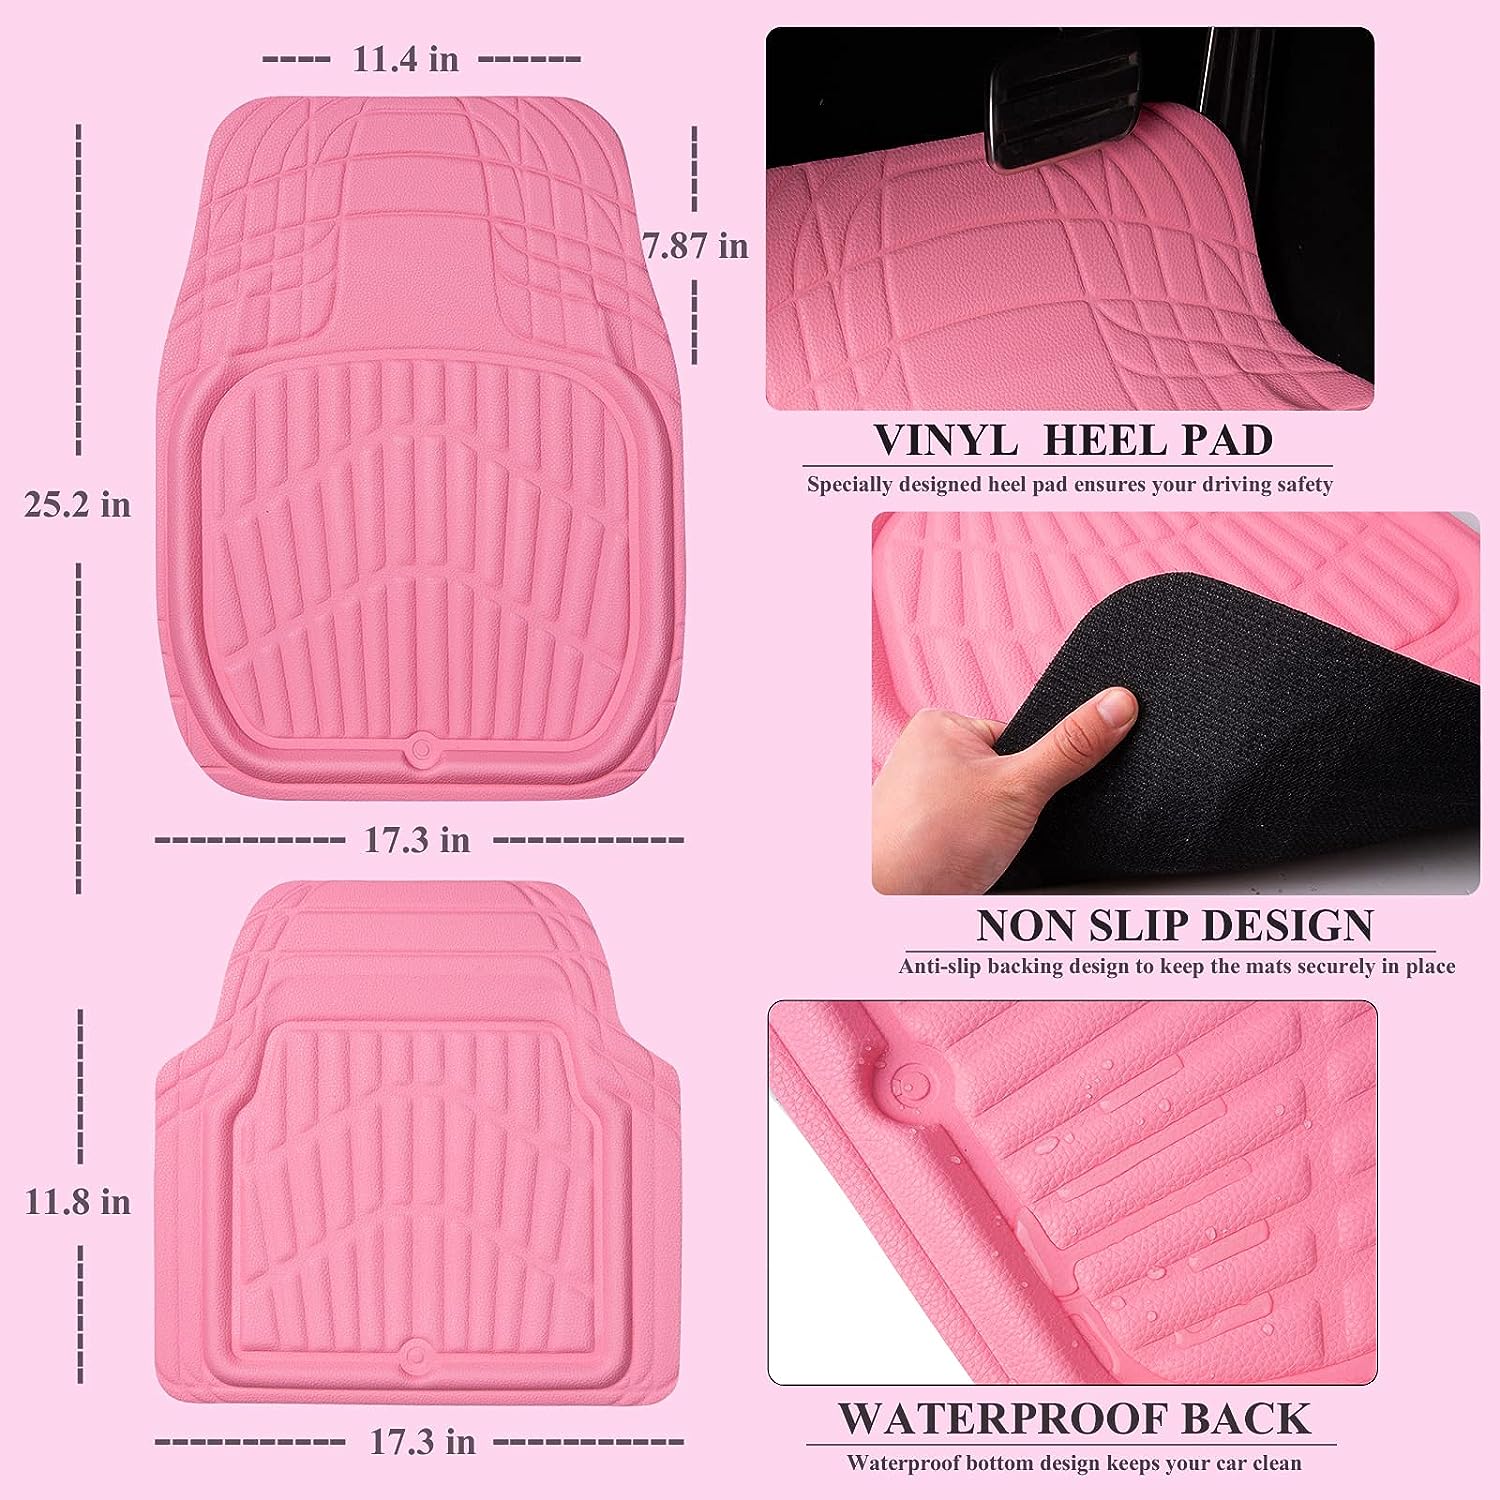 CAR PASS Nappa Pink Leather Car Seat Covers Full Set Cute for Women Waterproof Cushioned budle with 3D Waterproof Leather Car Floor Mats (Pink)